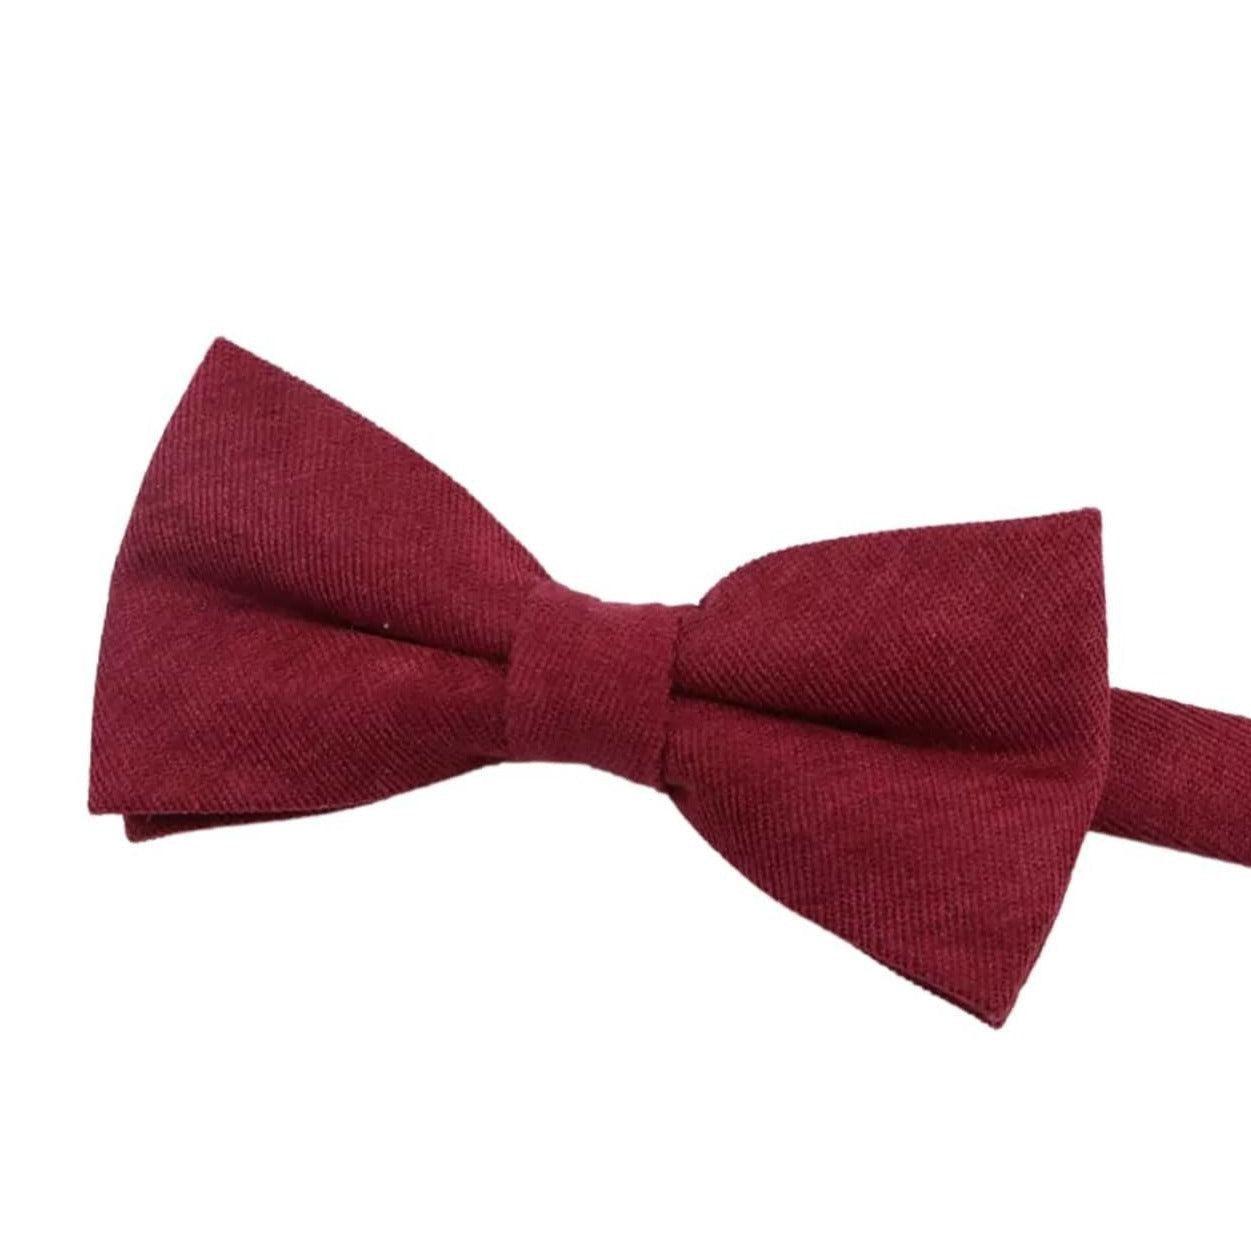 Red Bow Tie for Kids and baby’s Pre-Tied PHOENIX MYTIESHOP-Bow Tie 10.5 * 6CMfor toddlersColor: Red Wine Add some spunk to your little one&#39;s wardrobe with this PHOENIX Kids Red Floral Pre-Tied Bow Tie. Great for weddings, ring bearers, and other formal occasions, this bow tie will have your child looking dapper as can be. The red wine color is perfect for adding a pop of color, and the pre-tied design means that you won&#39;t have to worry about any tie-related mishaps. So let your child shine brigh